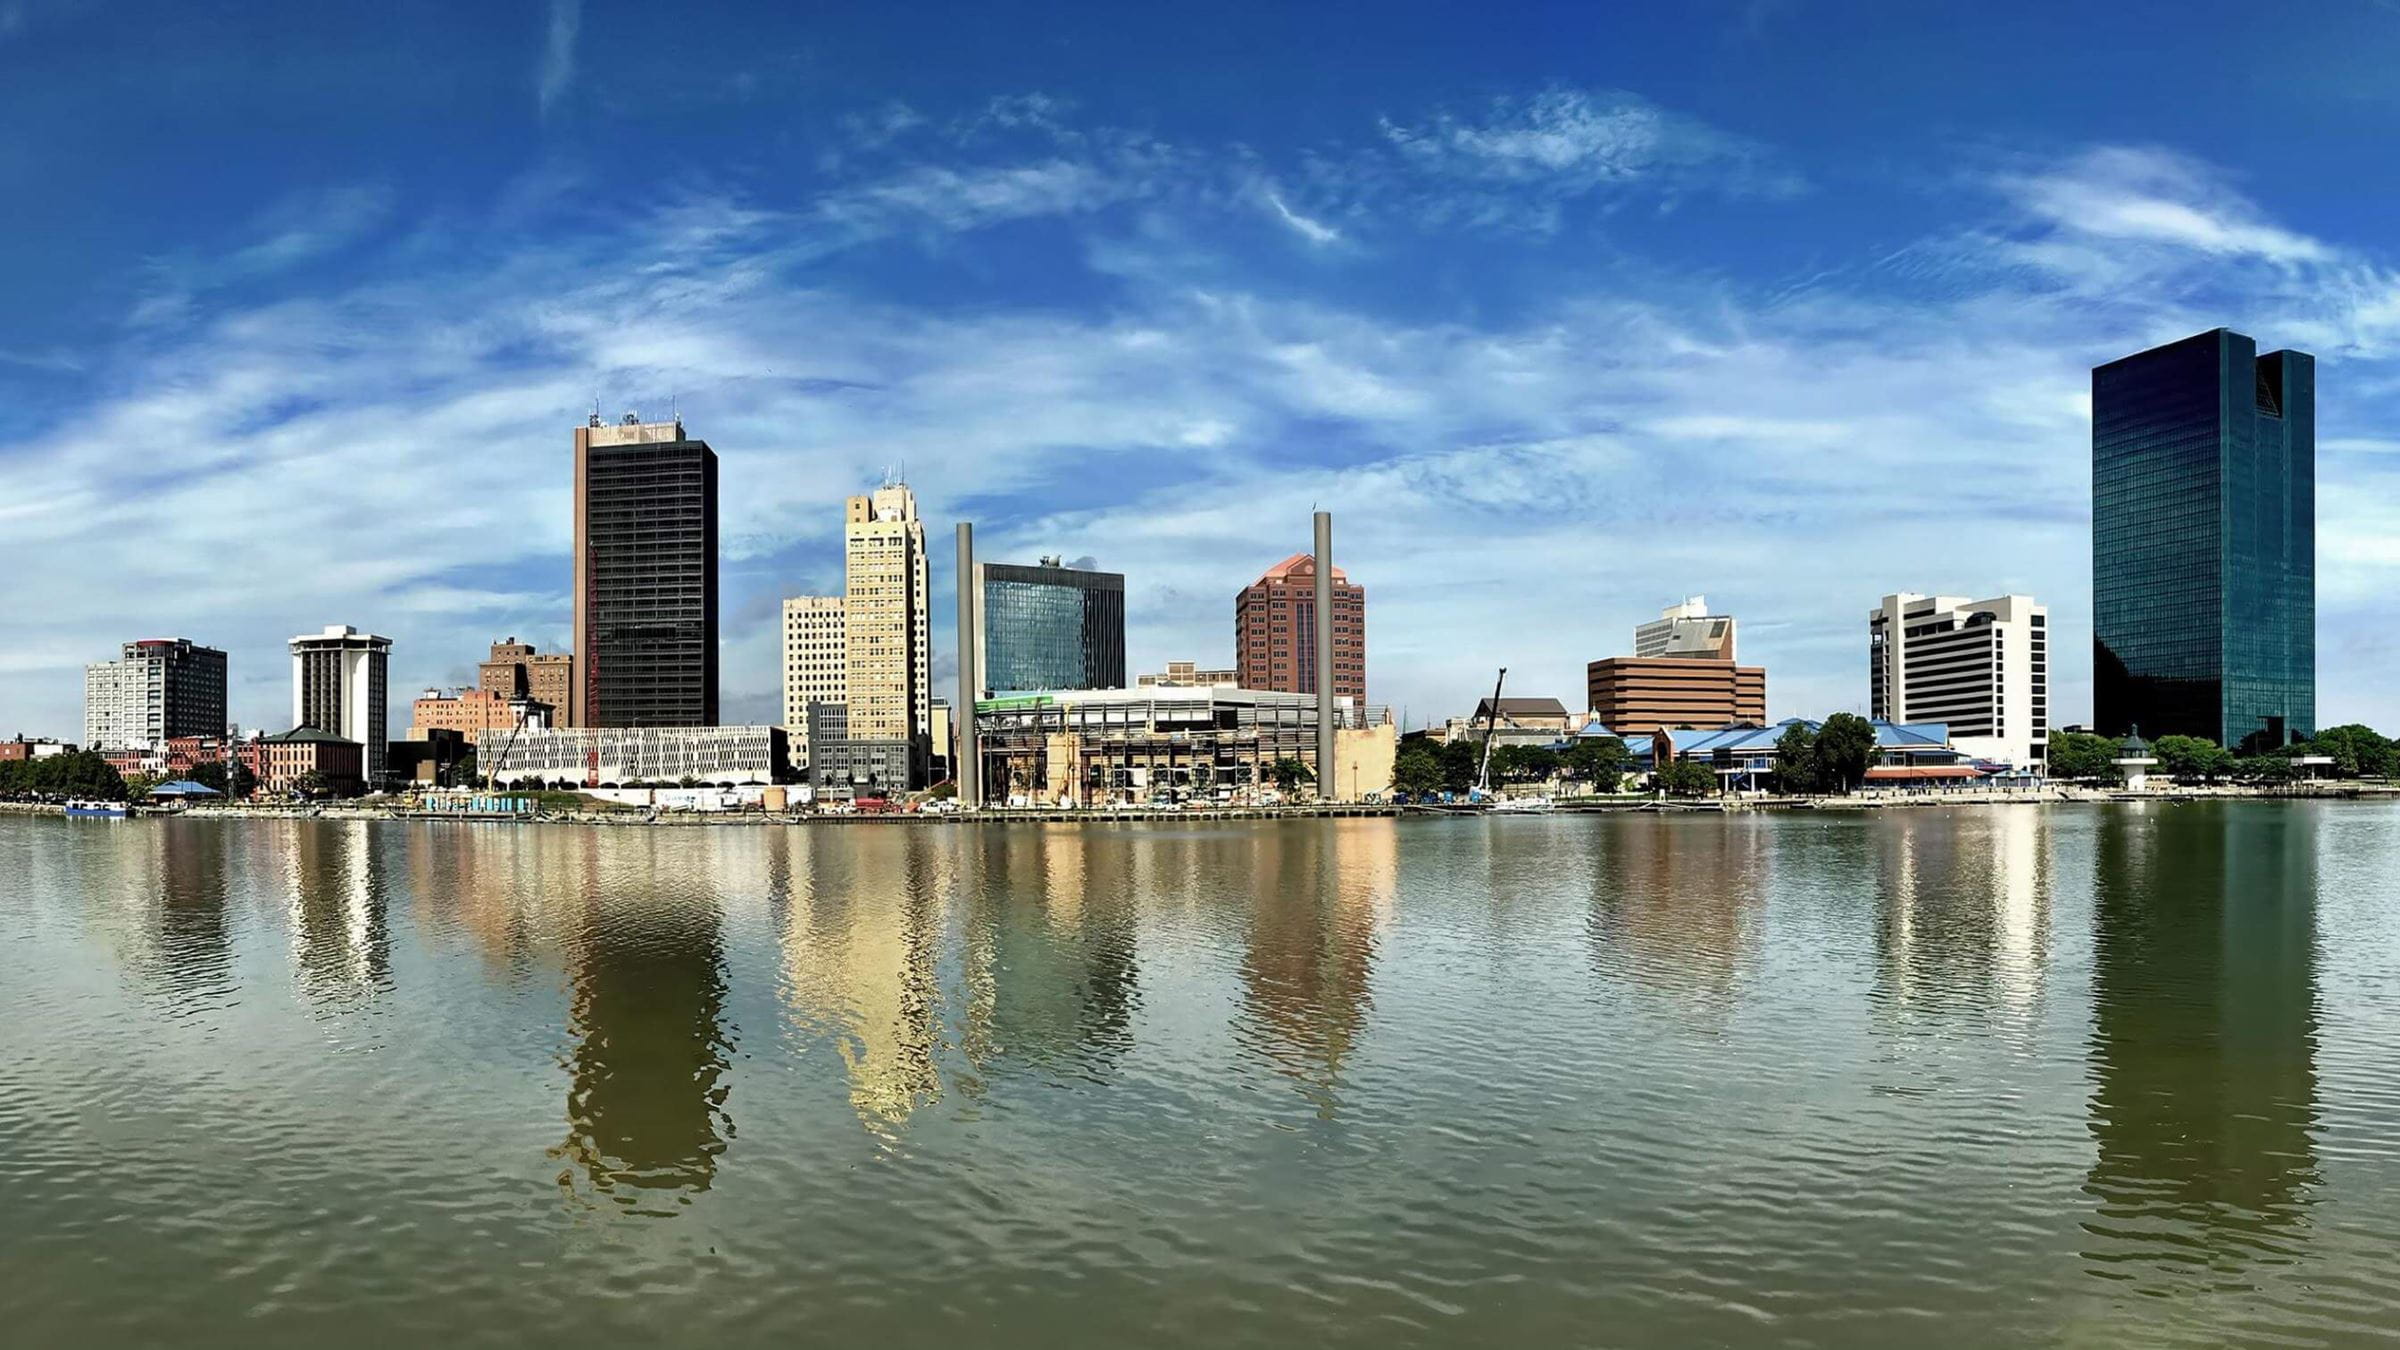 Ohio skyline from across the water